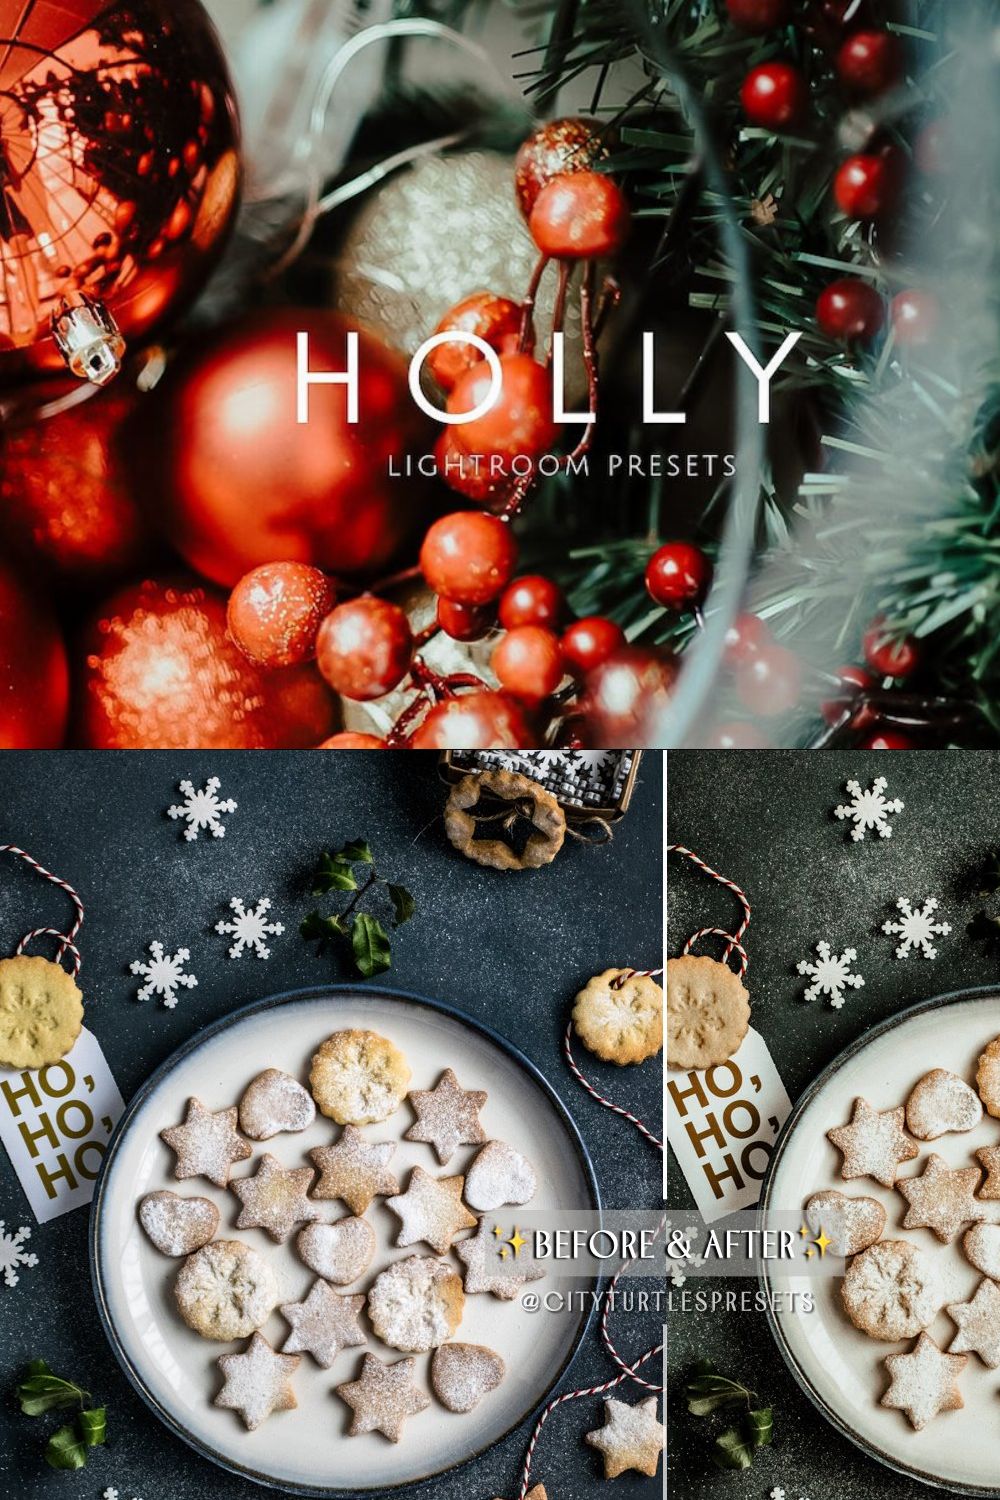 HOLLY Rich Vibrant Lightroom Presets pinterest preview image.